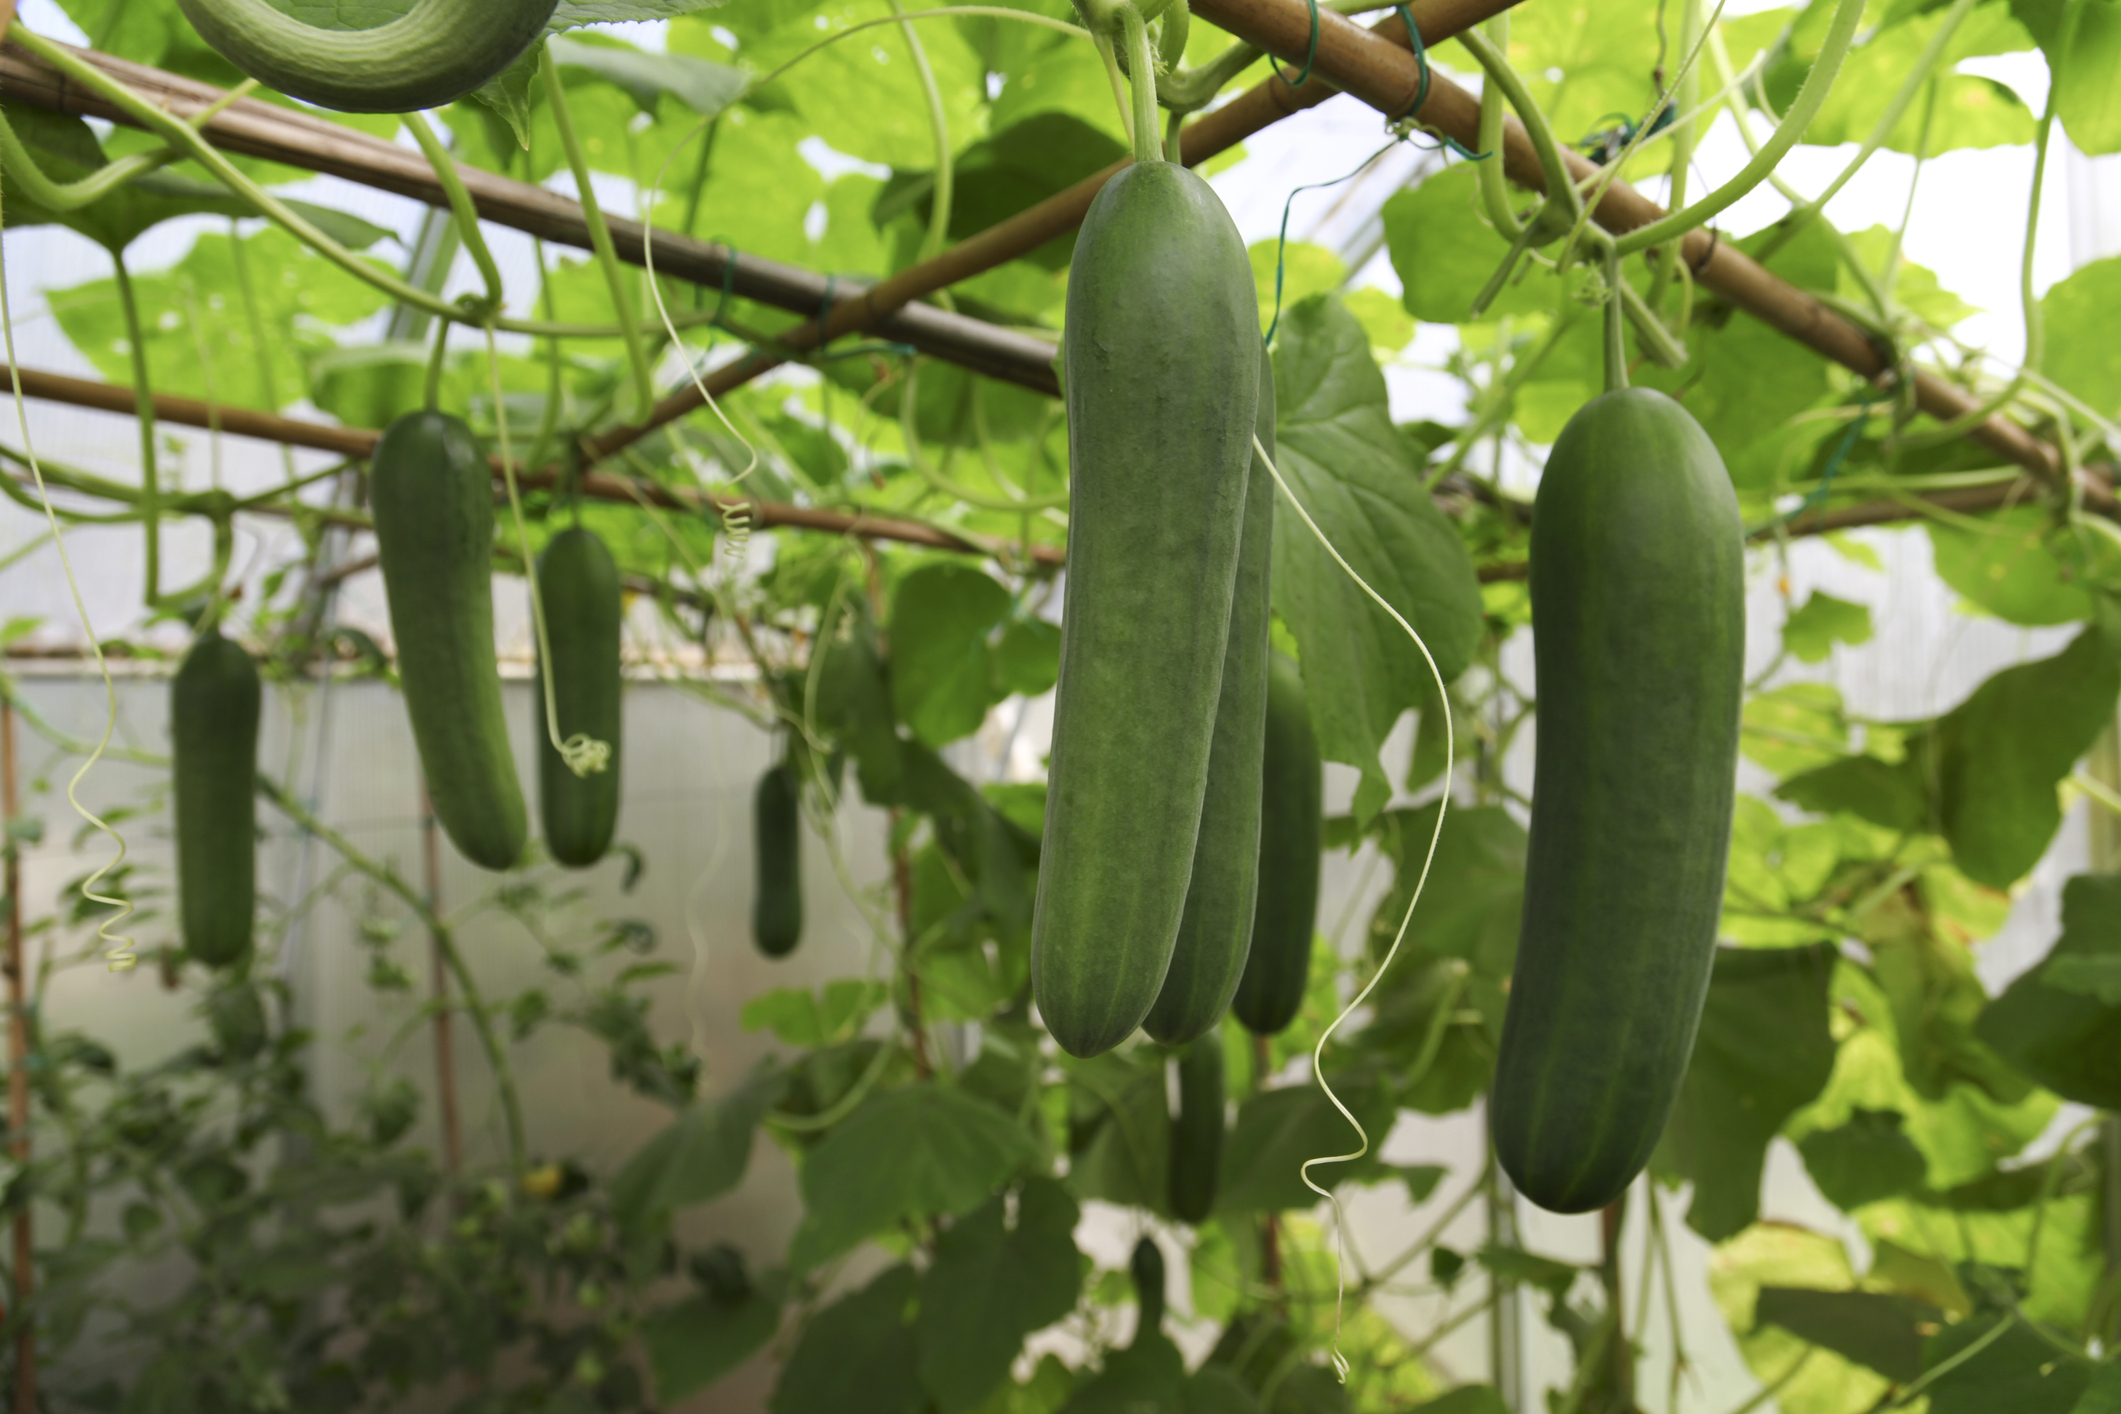 how to grow cucumbers – from seed, in pots, vertically or in your